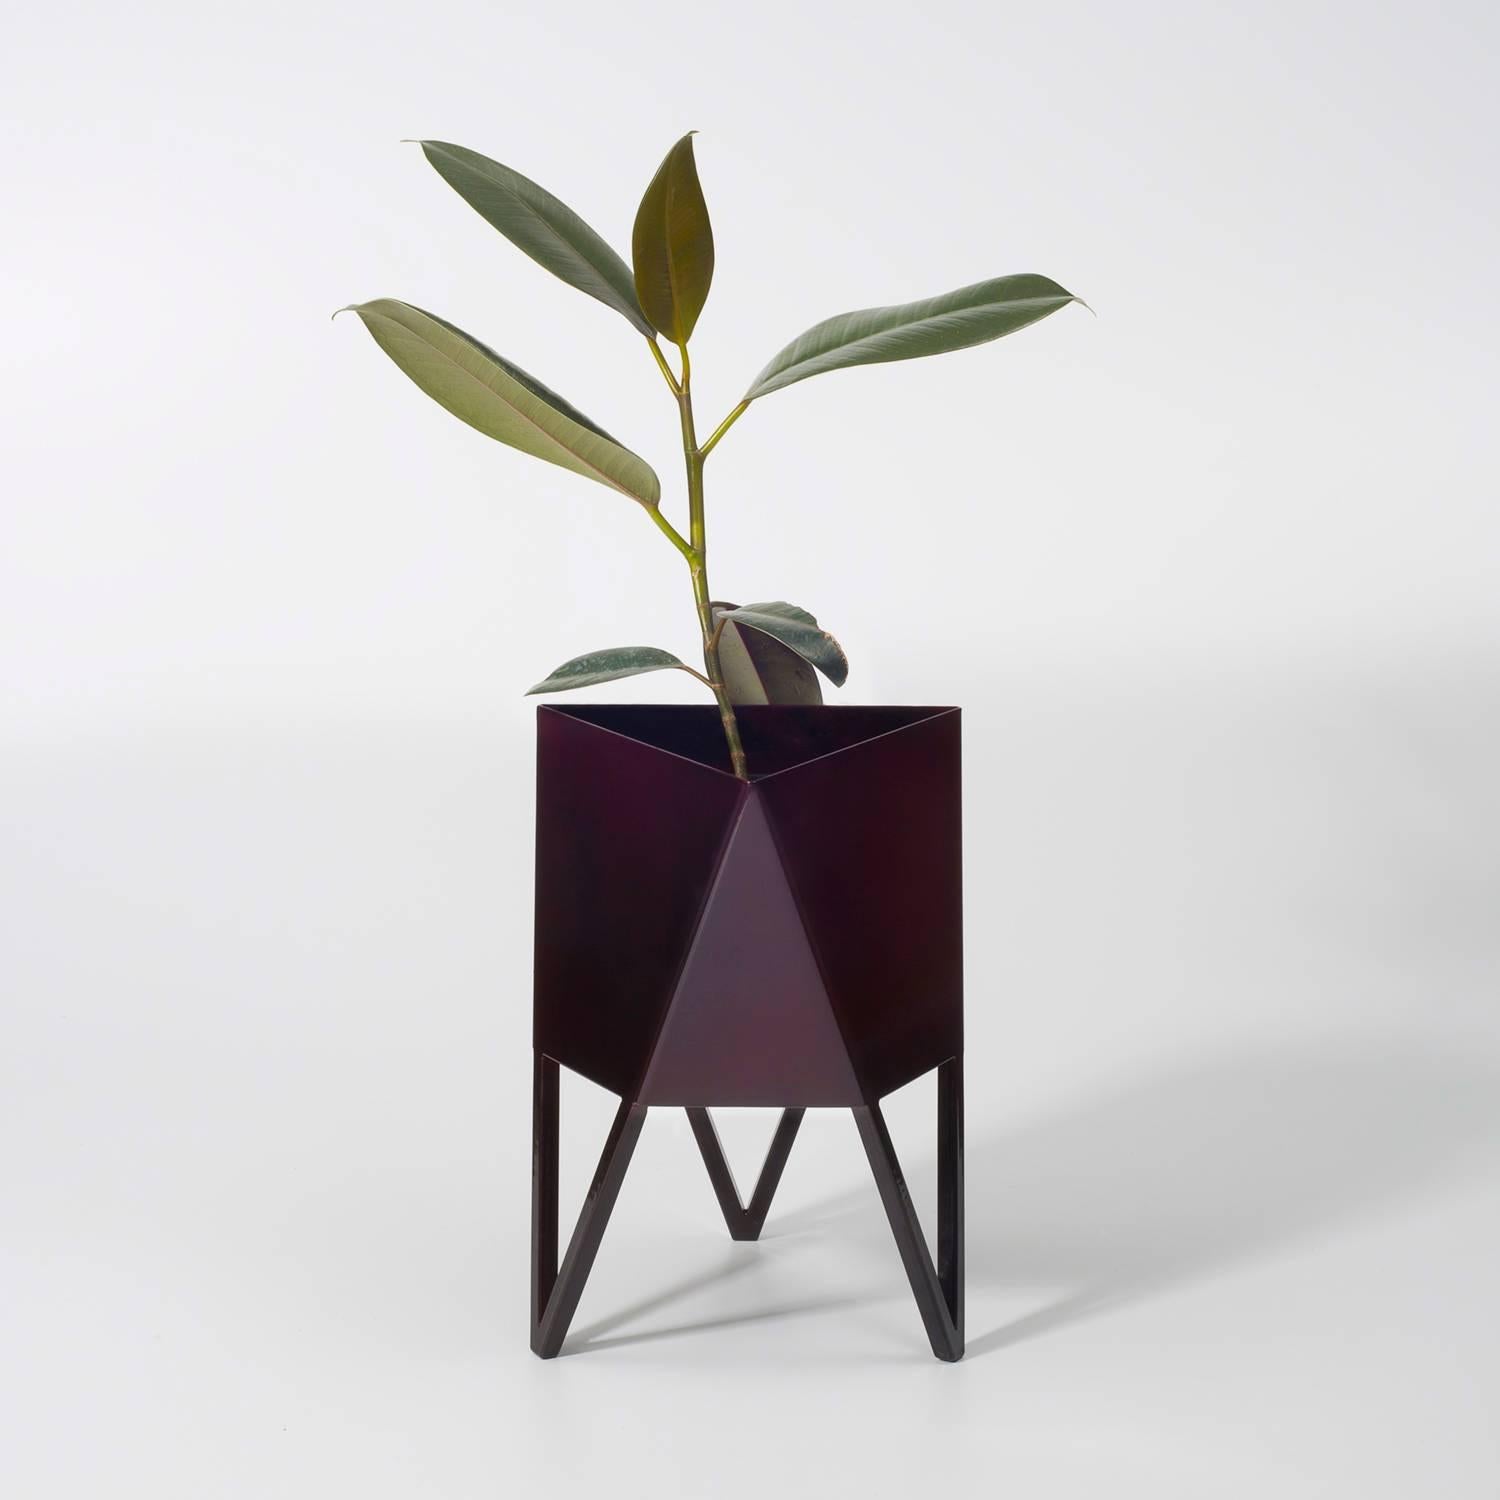 Deca Planter in Glossy White Steel, Mini, by Force/Collide 2